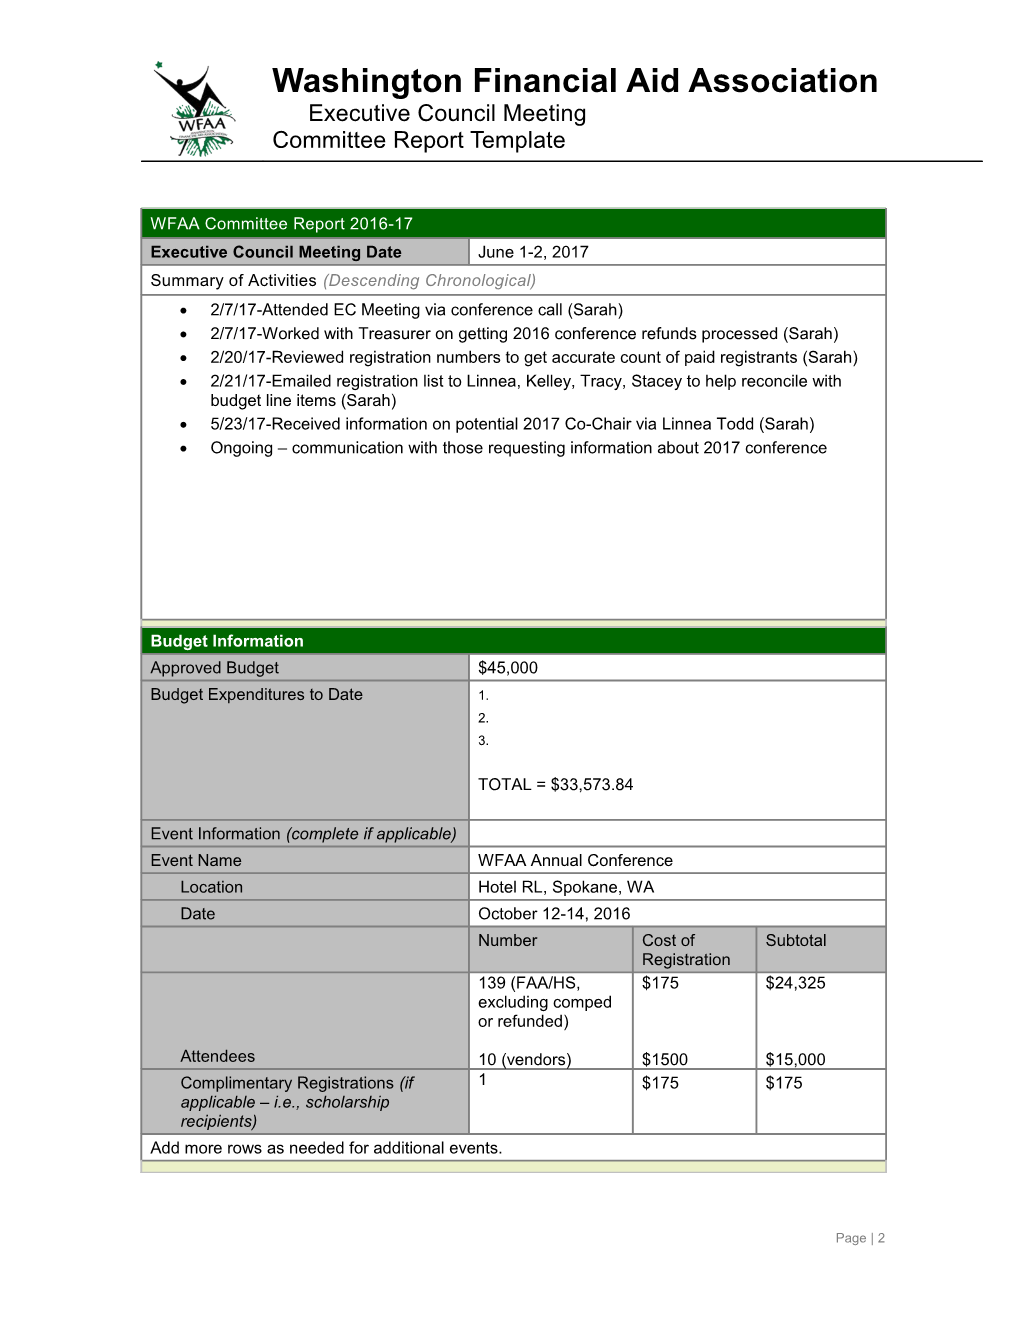 Save the Completed Report Using Committee Title and Date (Example: WASFAA JRSMLI Feb 10 s3